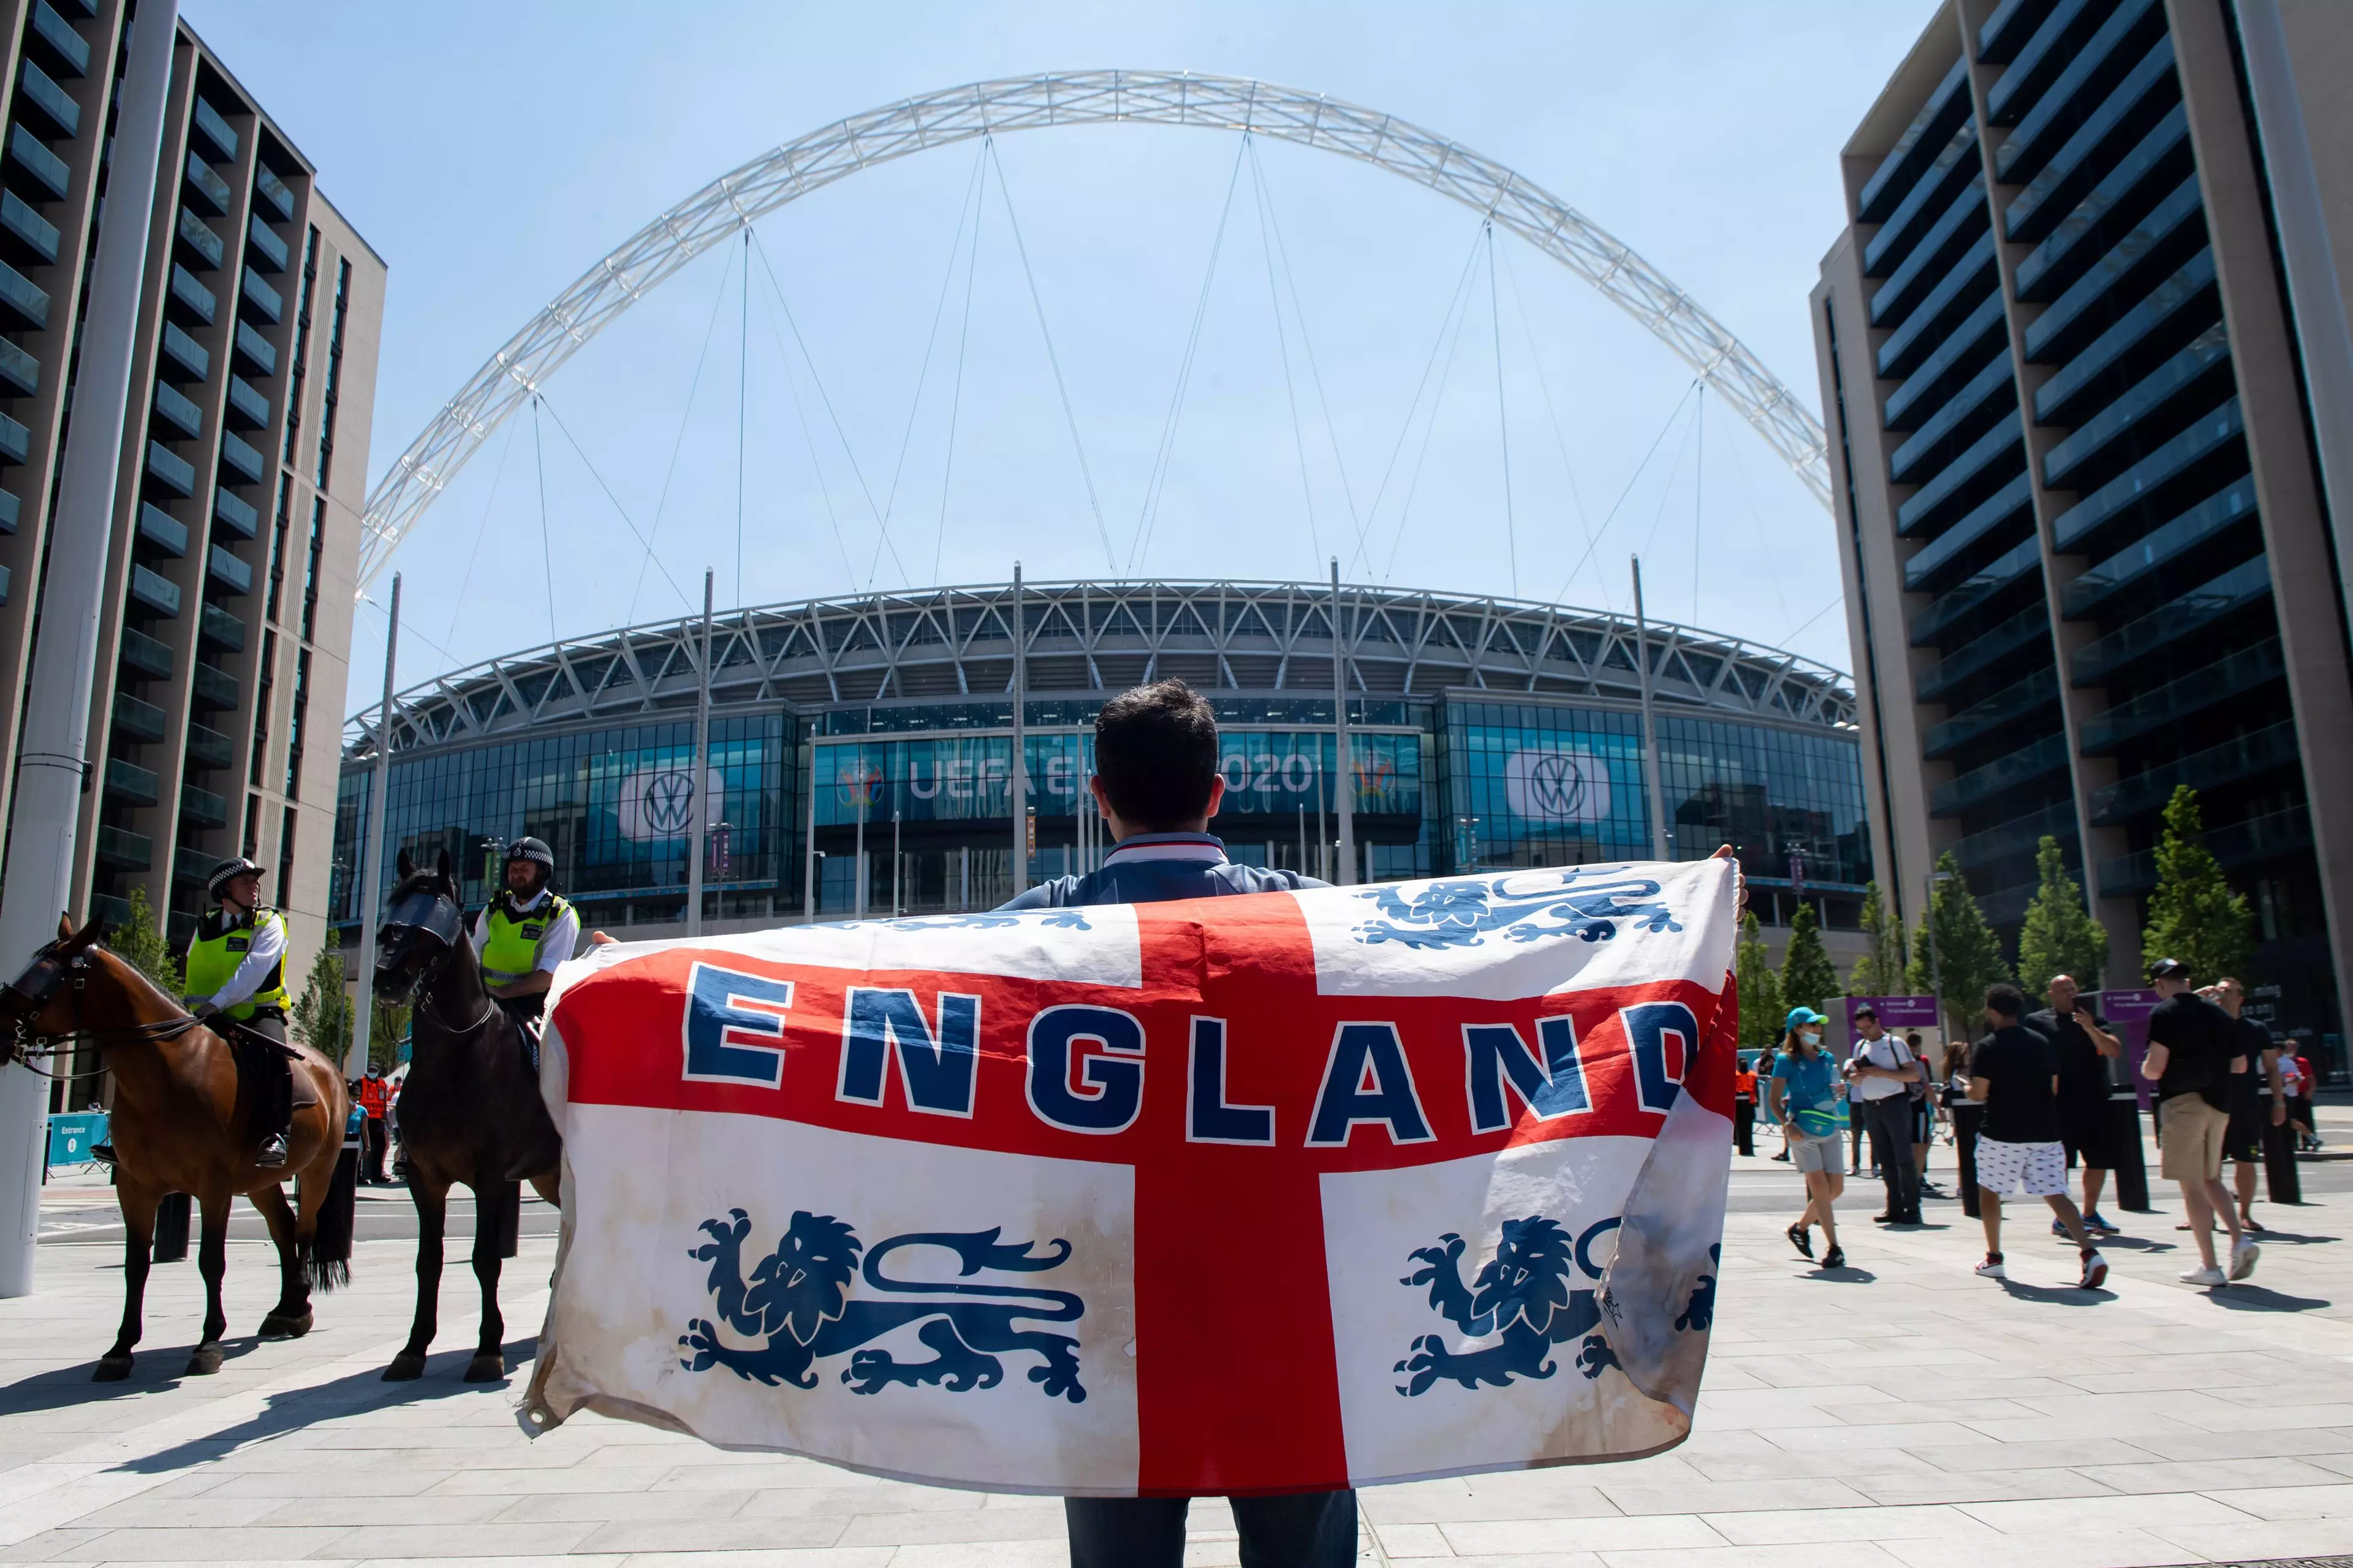 A study found that the risk of domestic abuse increased when the England team lost (